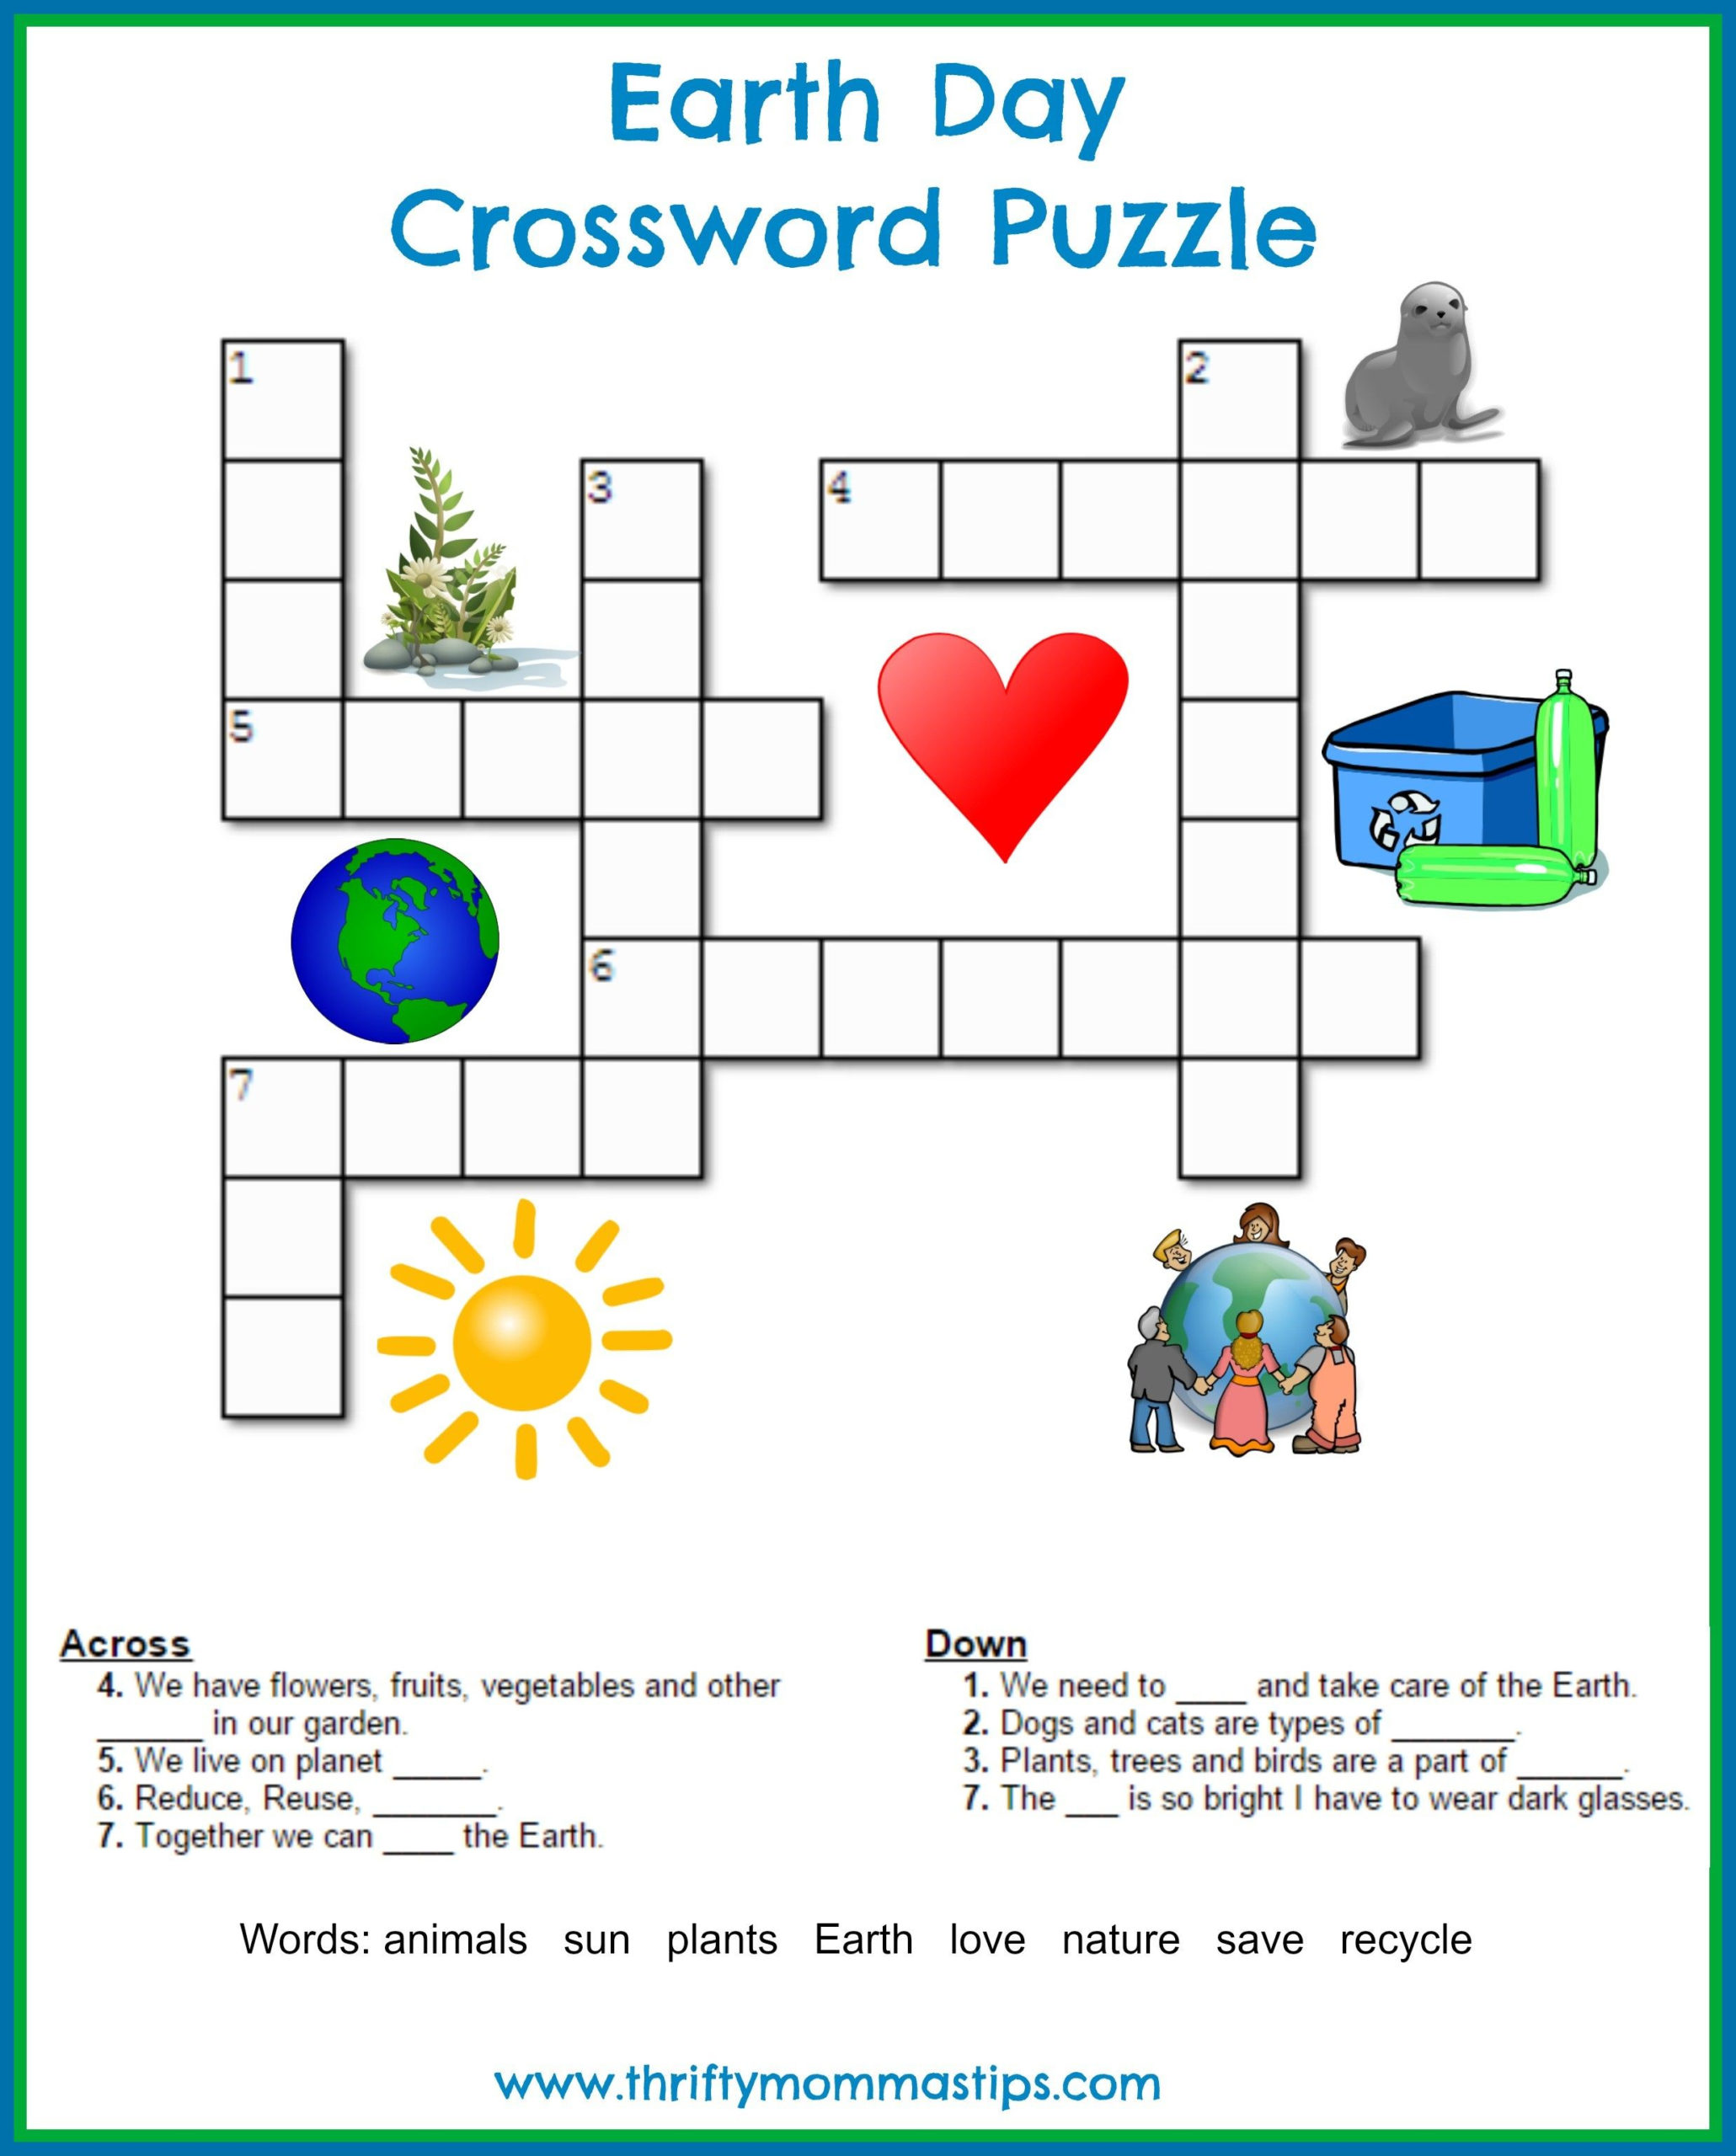 Free Printable Crossword Puzzles For Earth Science